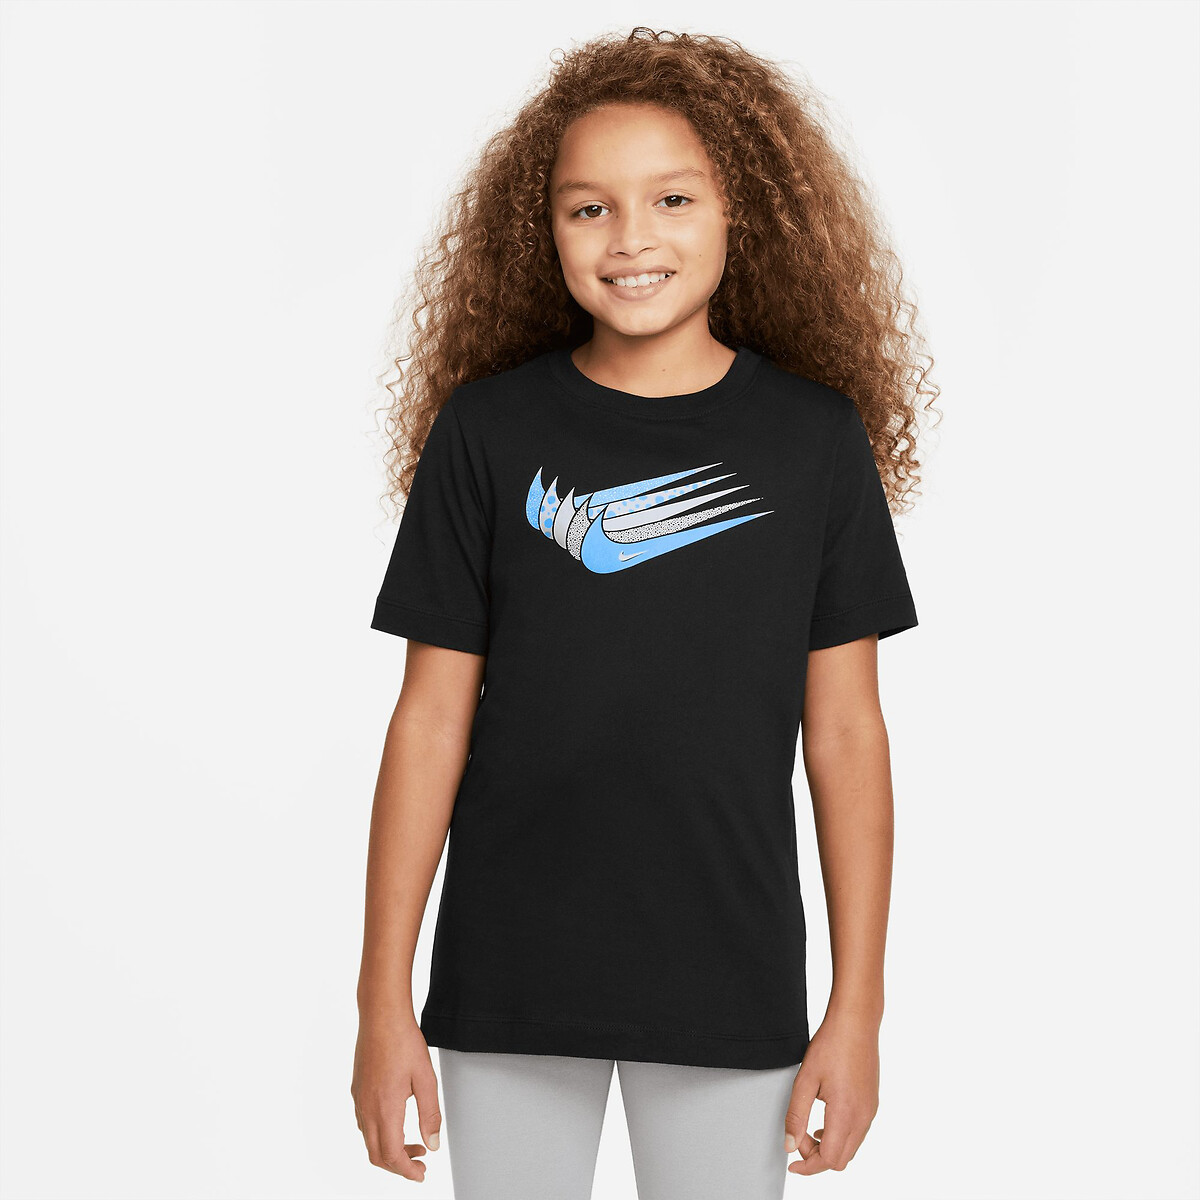 Image of Logo Print Cotton T-Shirt with Short Sleeves, 7-16 Years